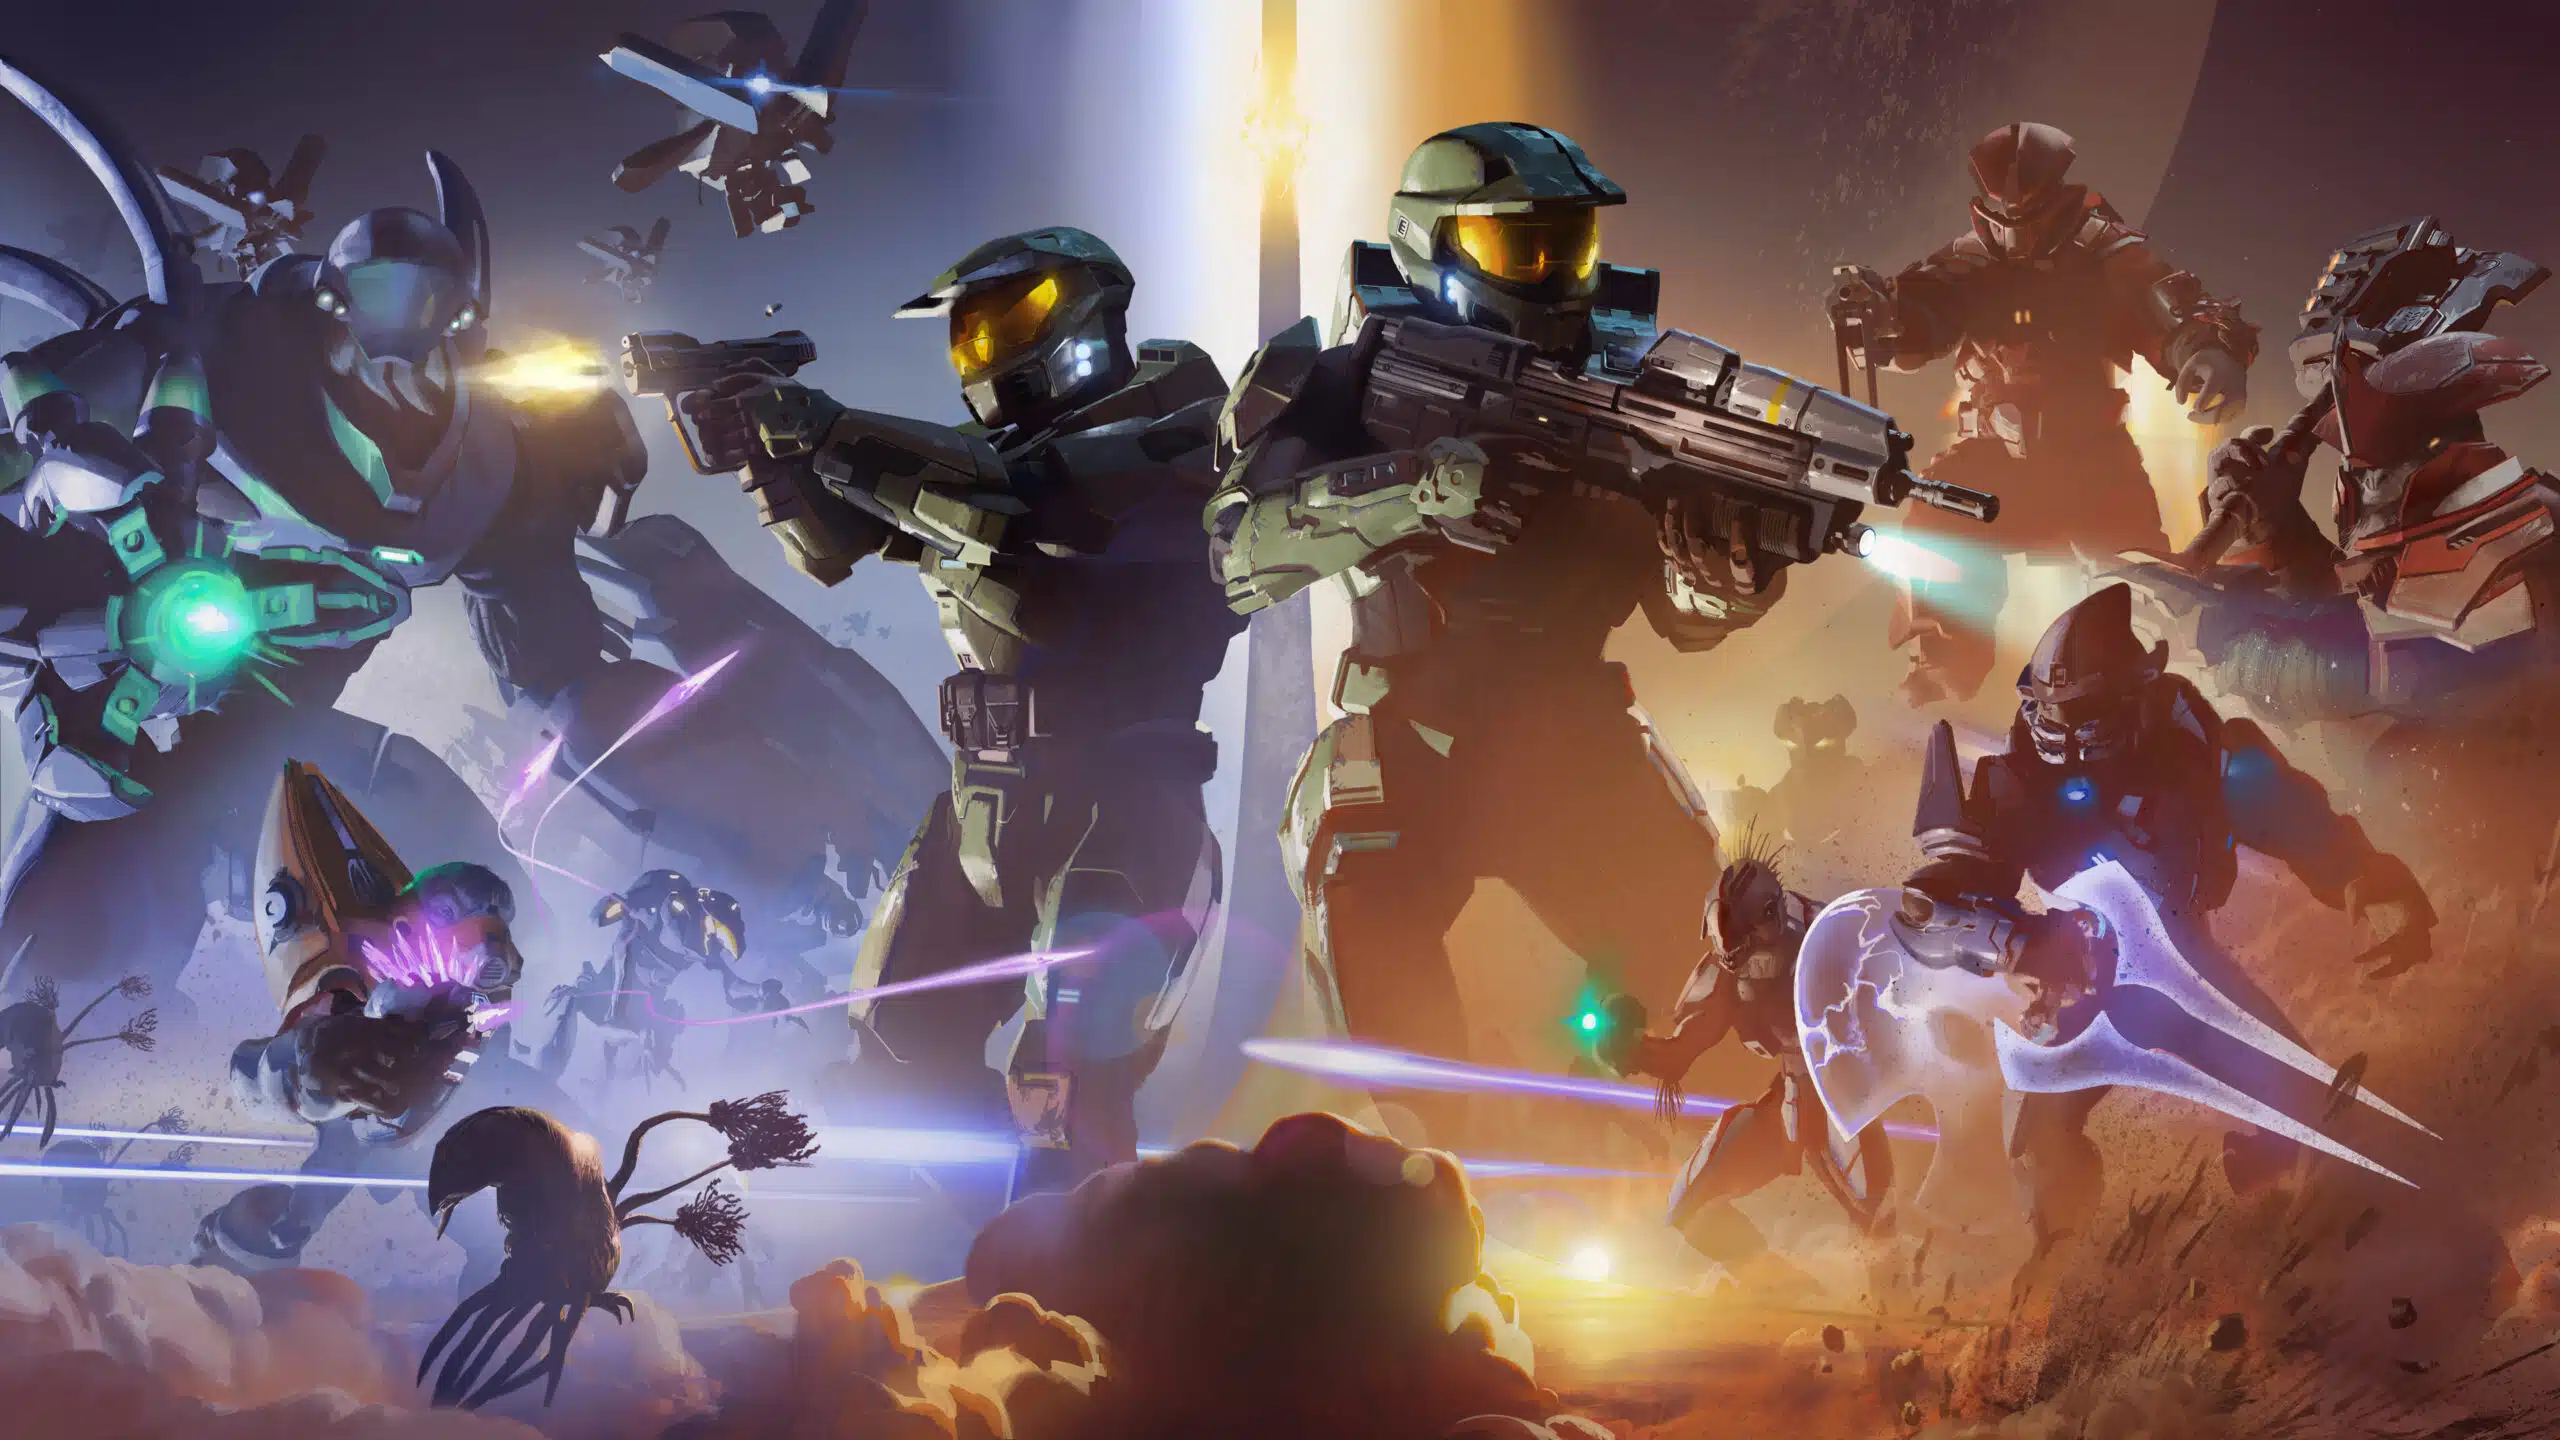 halo mcc update for december 7